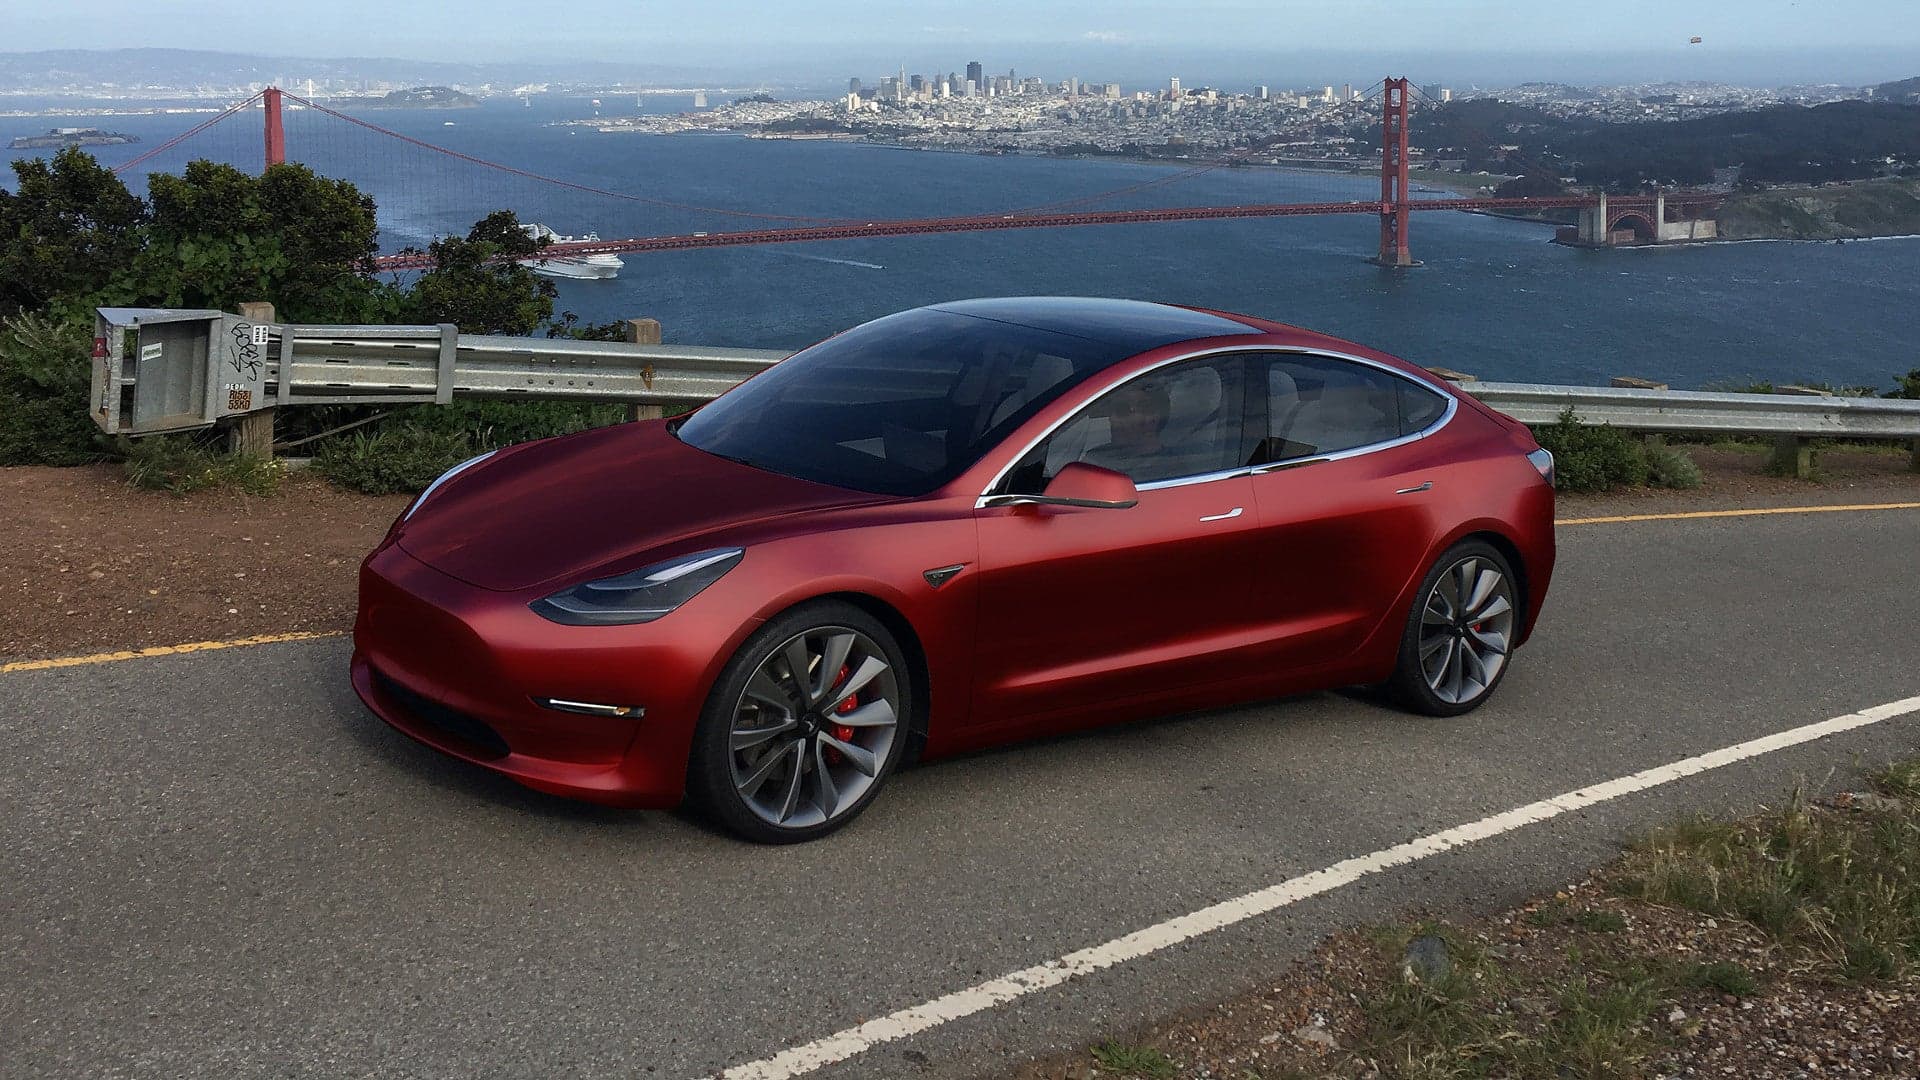 Tesla Model 3 Will Offer Less Than 100 Configurations, Compared to 1,500 for the Model S